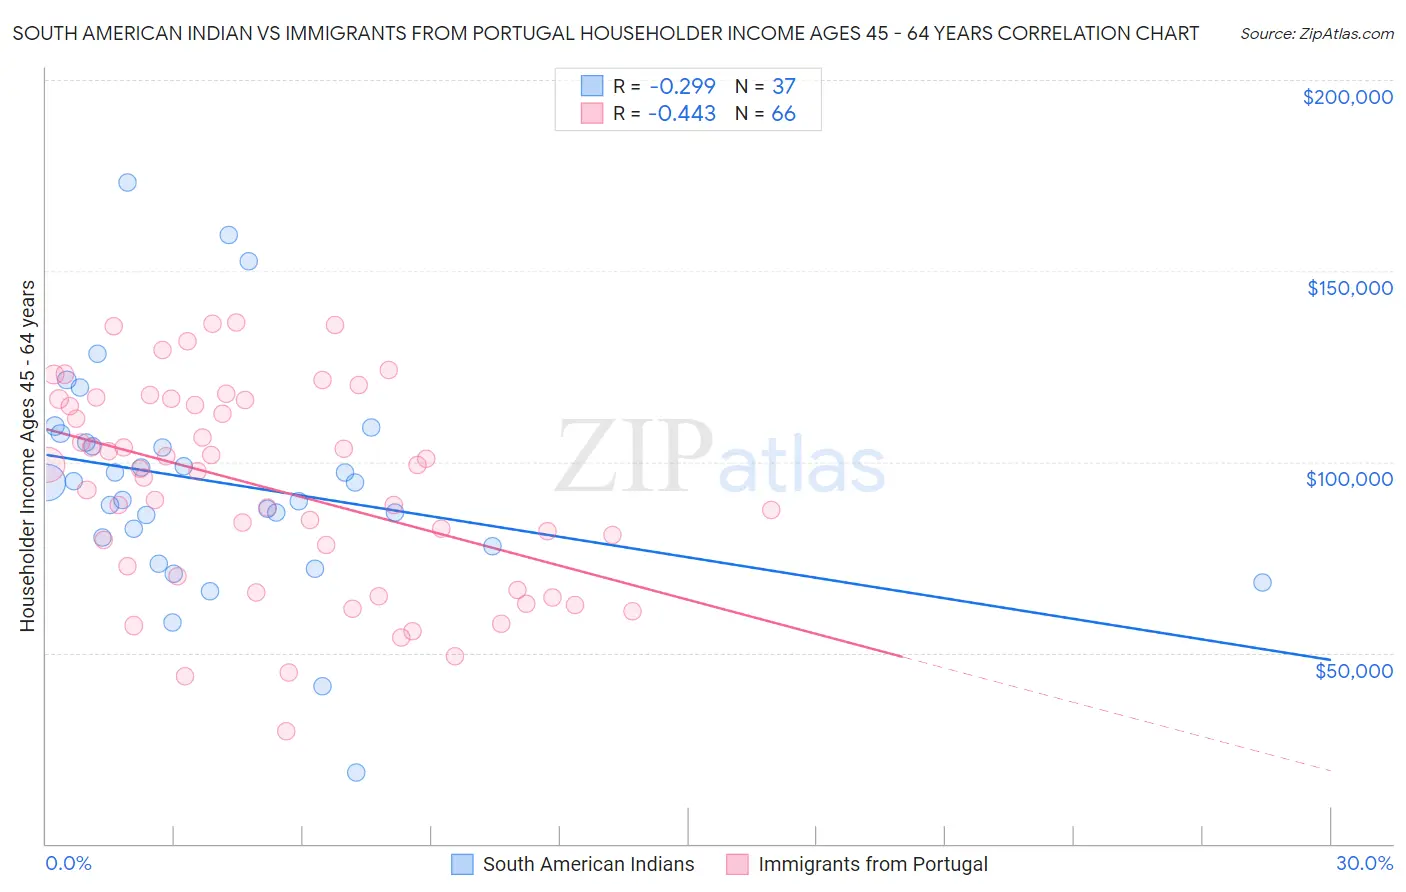 South American Indian vs Immigrants from Portugal Householder Income Ages 45 - 64 years